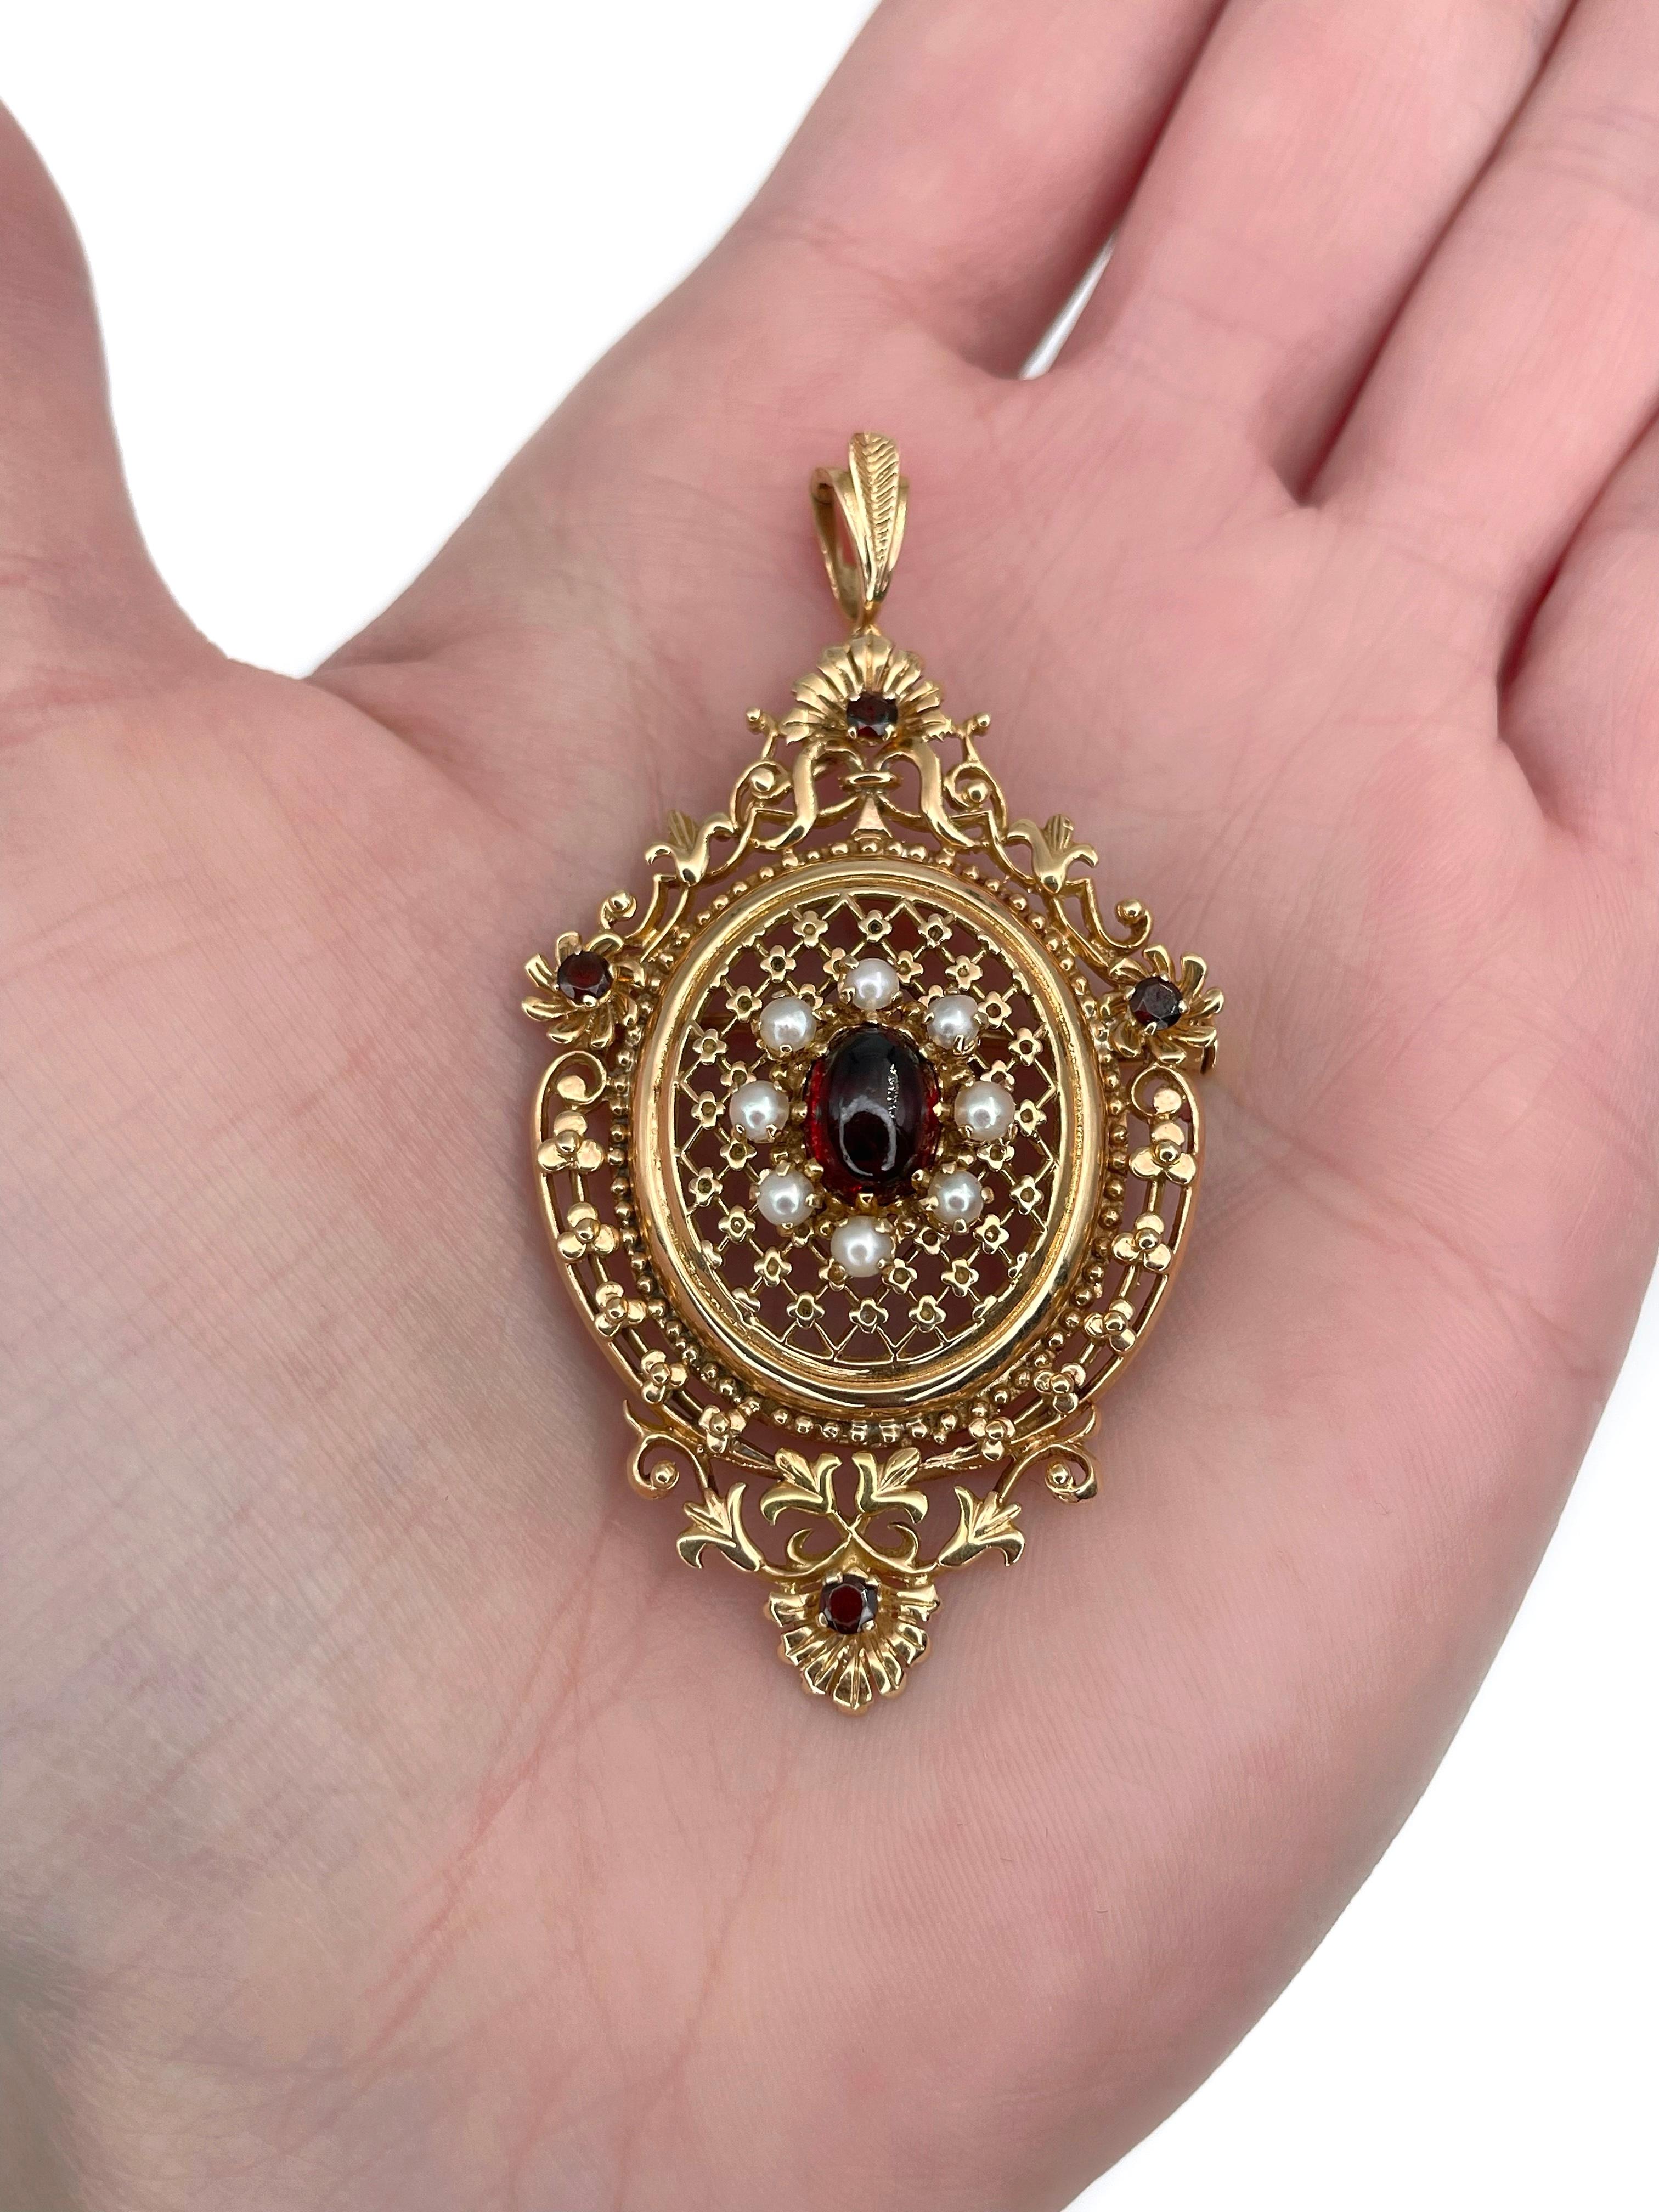 This is an Edwardian openwork pendant/brooch crafted in 9K yellow gold. Circa 1910.  

The piece features oval cabochon cut and round cut garnets. The central gem is surrounded with cultured pearls. 

The piece has a trombone clasp. 

Weight: